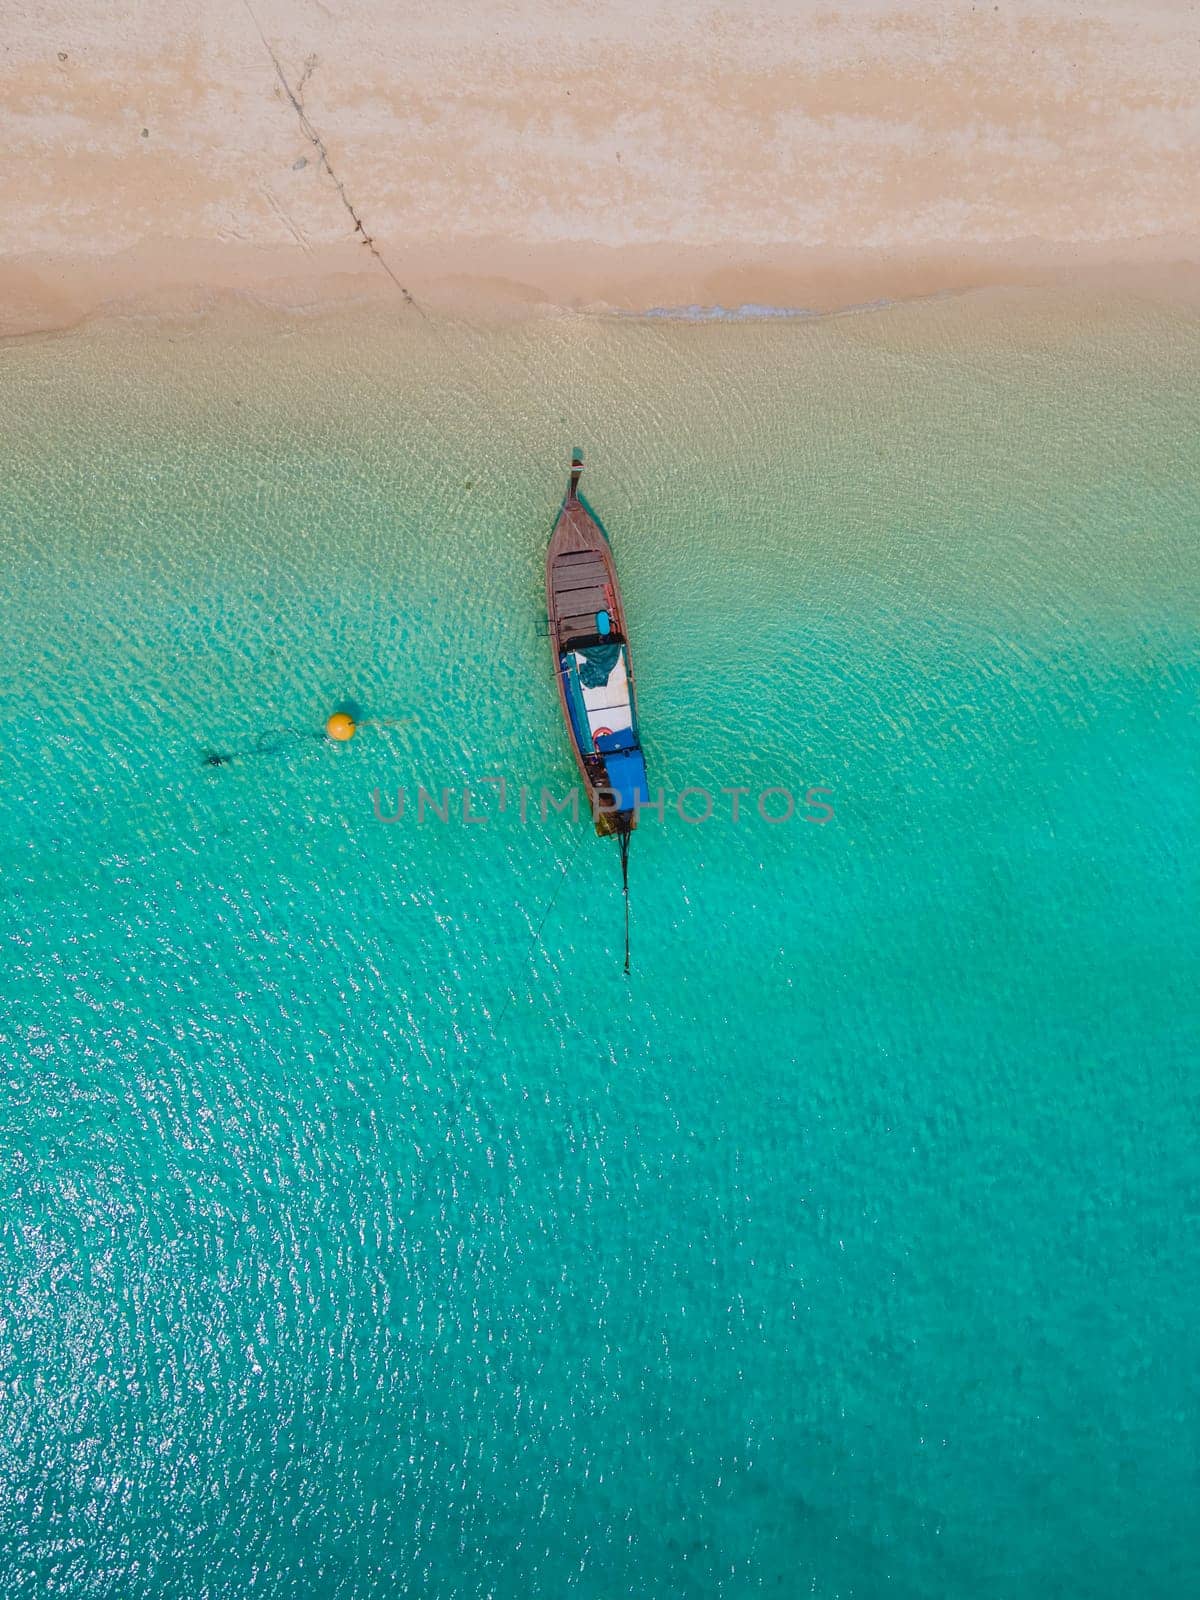 Koh Kradan Island with a white tropical beach and turqouse colored ocean. Drone aerial view at the beach with longtail boat